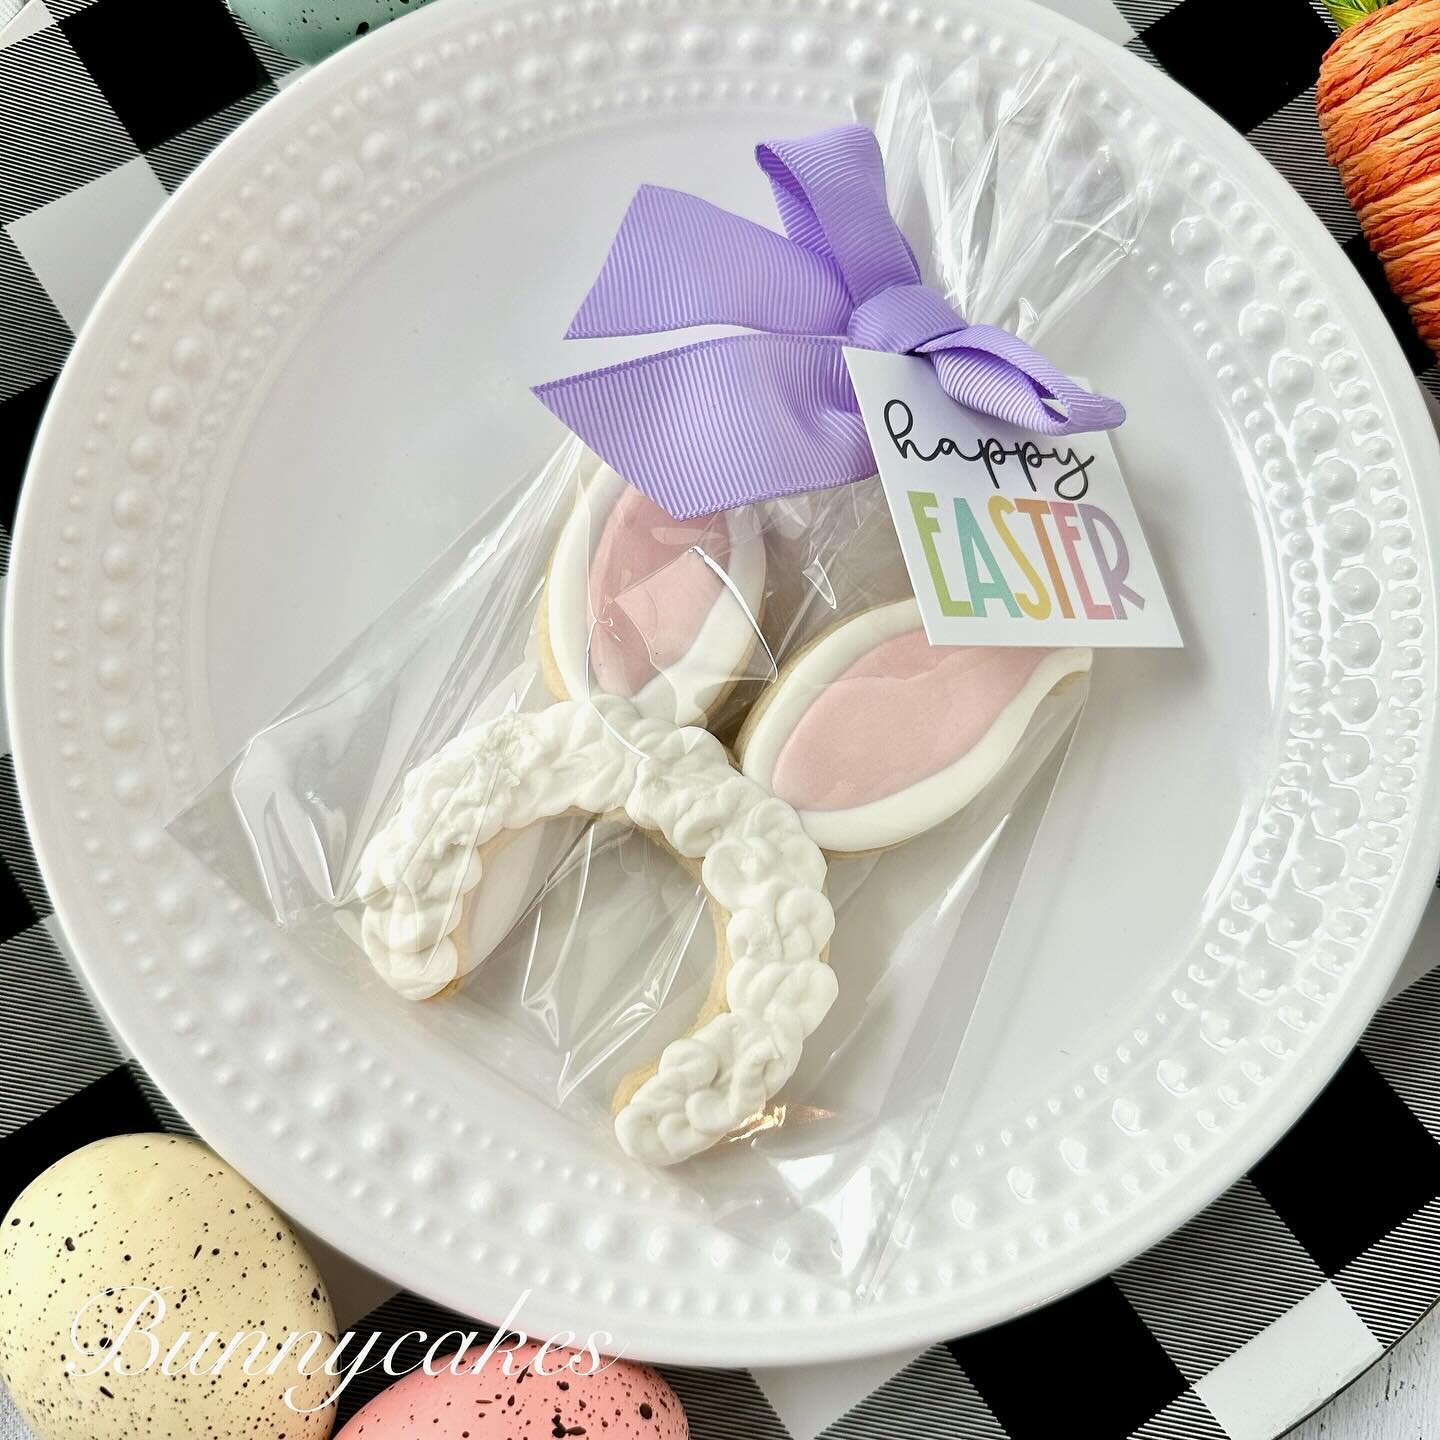 Easter is coming SOON!! Here is a sneak peek of some of the options that will be available next Sunday, March 10th at 6:00pm on my website!! 

So MARK YOUR CALENDARS!  I have had a few inquiries for Easter Cookie kits and I will definitely have them 